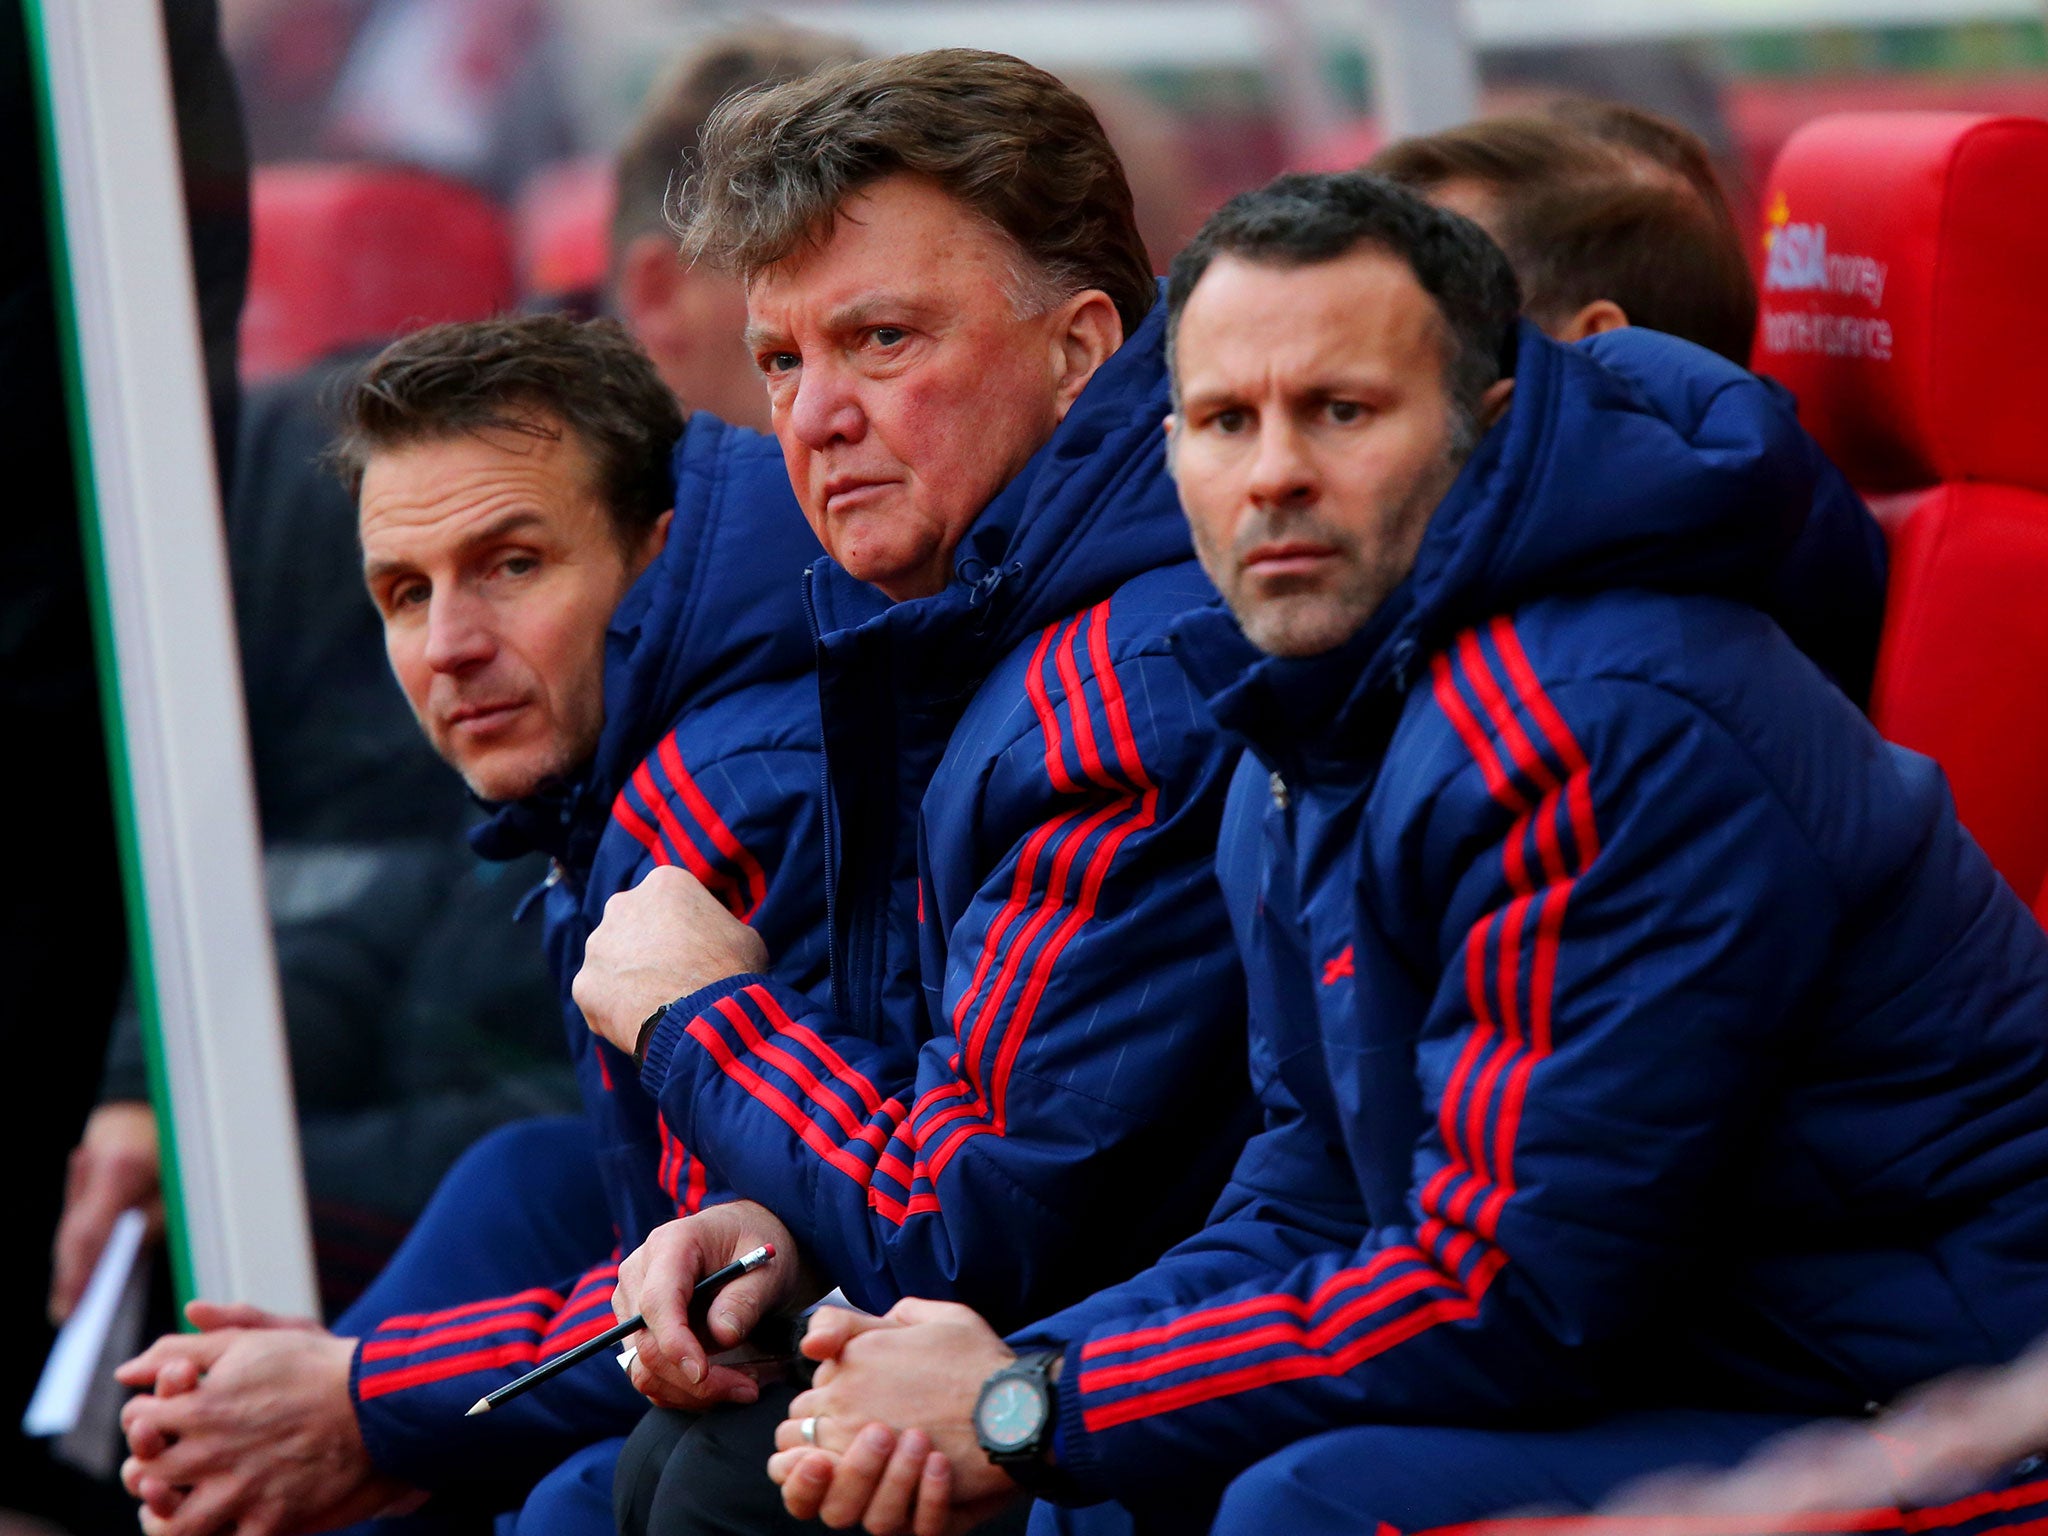 Louis van Gaal says he will 'wait and see' if he is sacked as Manchester United manager